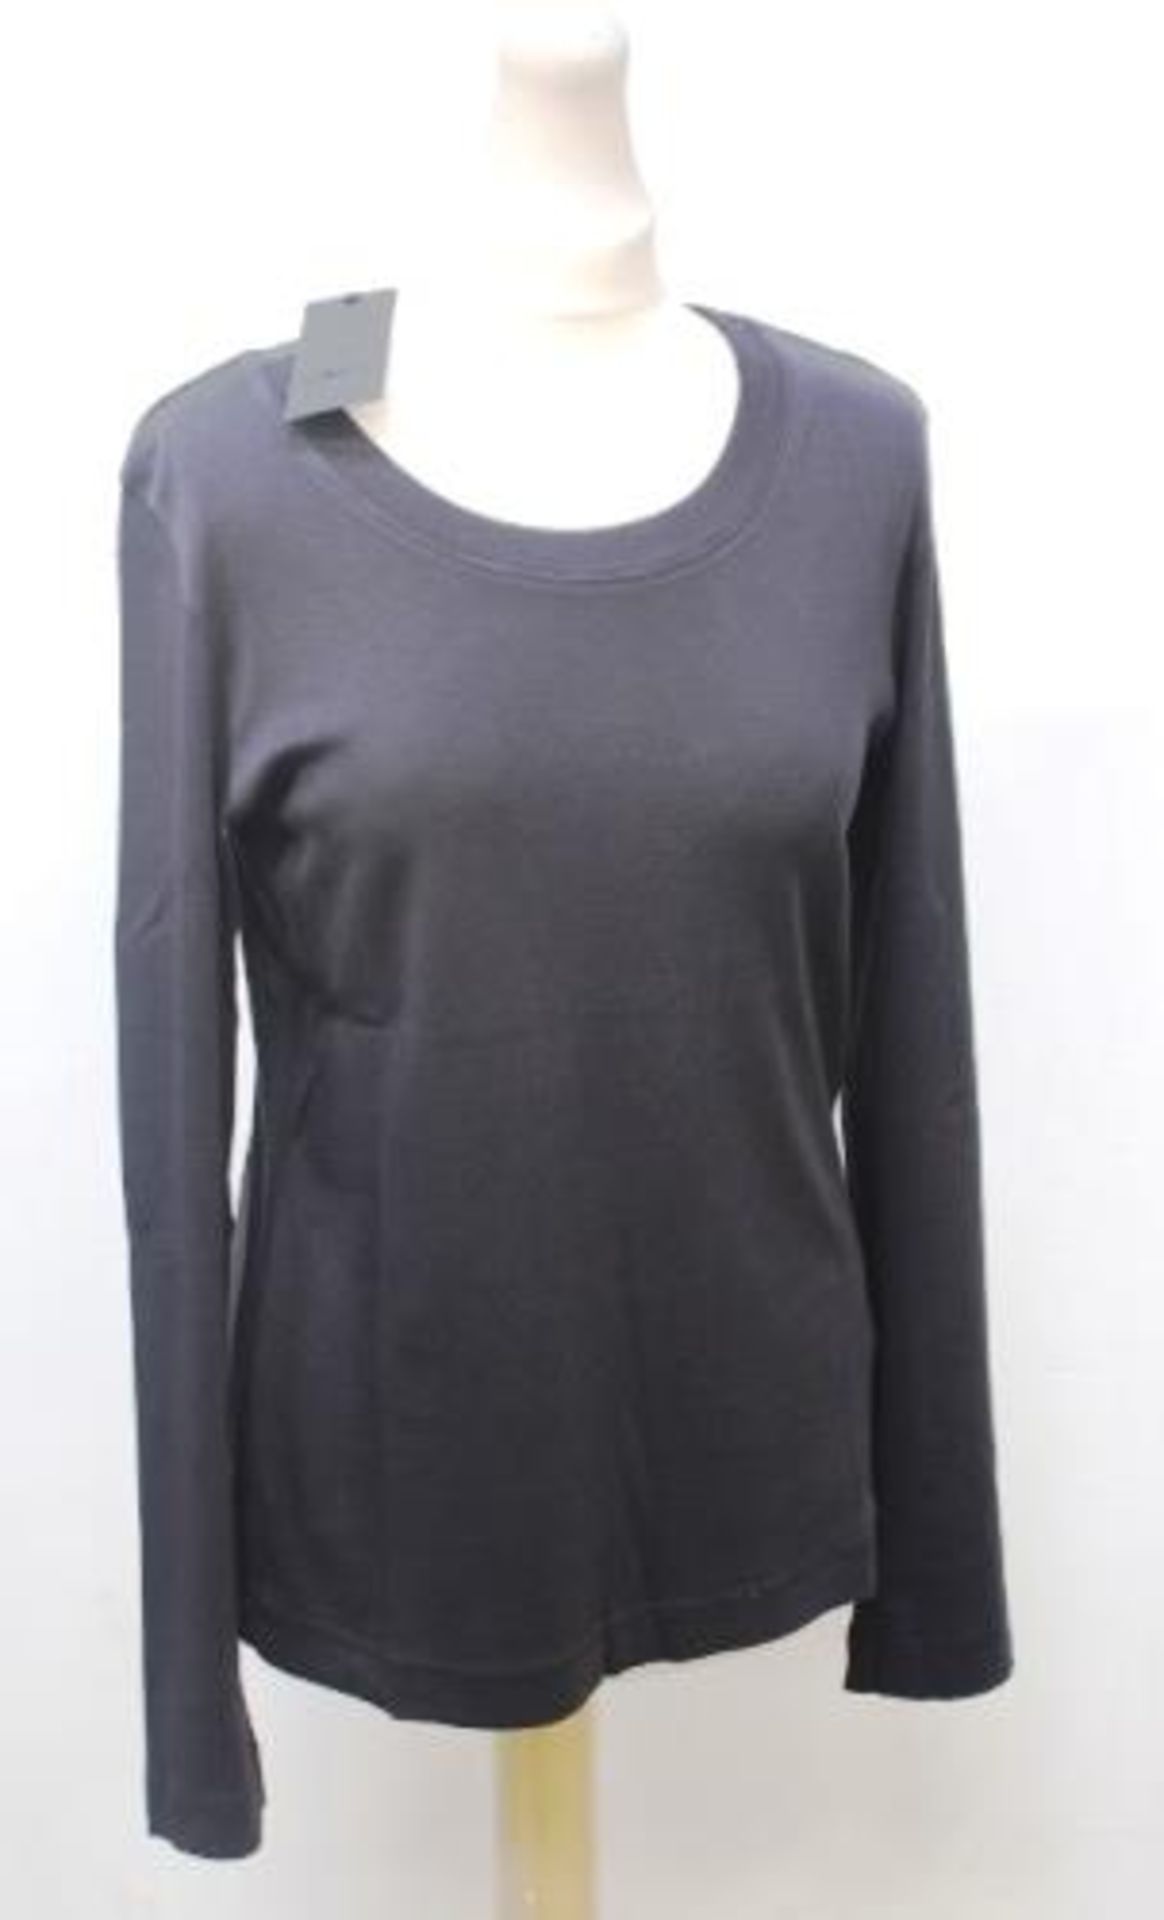 2 x Oska Christy long sleeve shirts, size 5, black, RRP £69.00 each - New with tags (ES15)